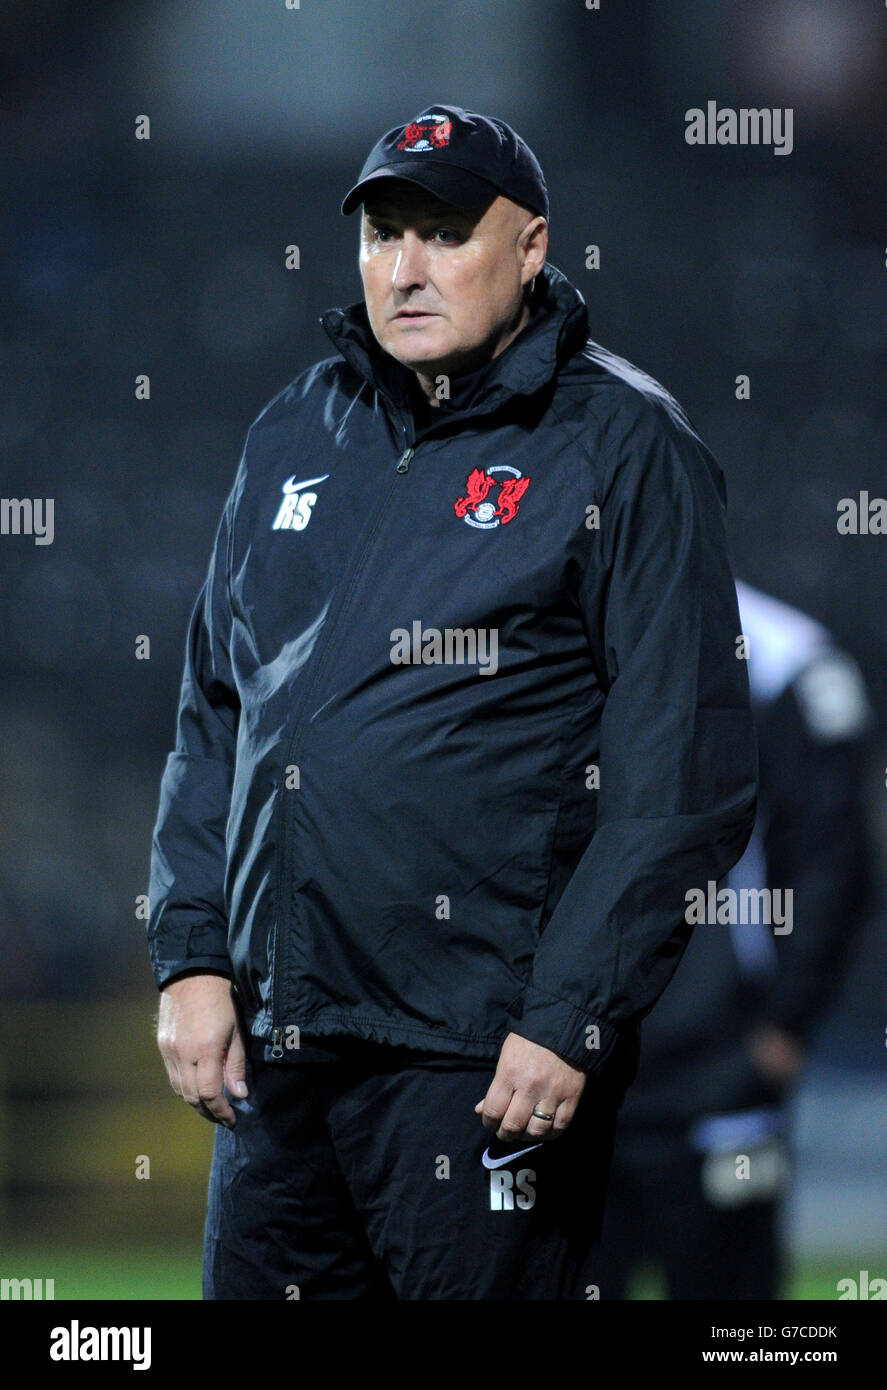 Soccer - Sky Bet League One - Notts County v Leyton Orient - Meadow Lane. Leyton Orient manager Russell Slade Stock Photo